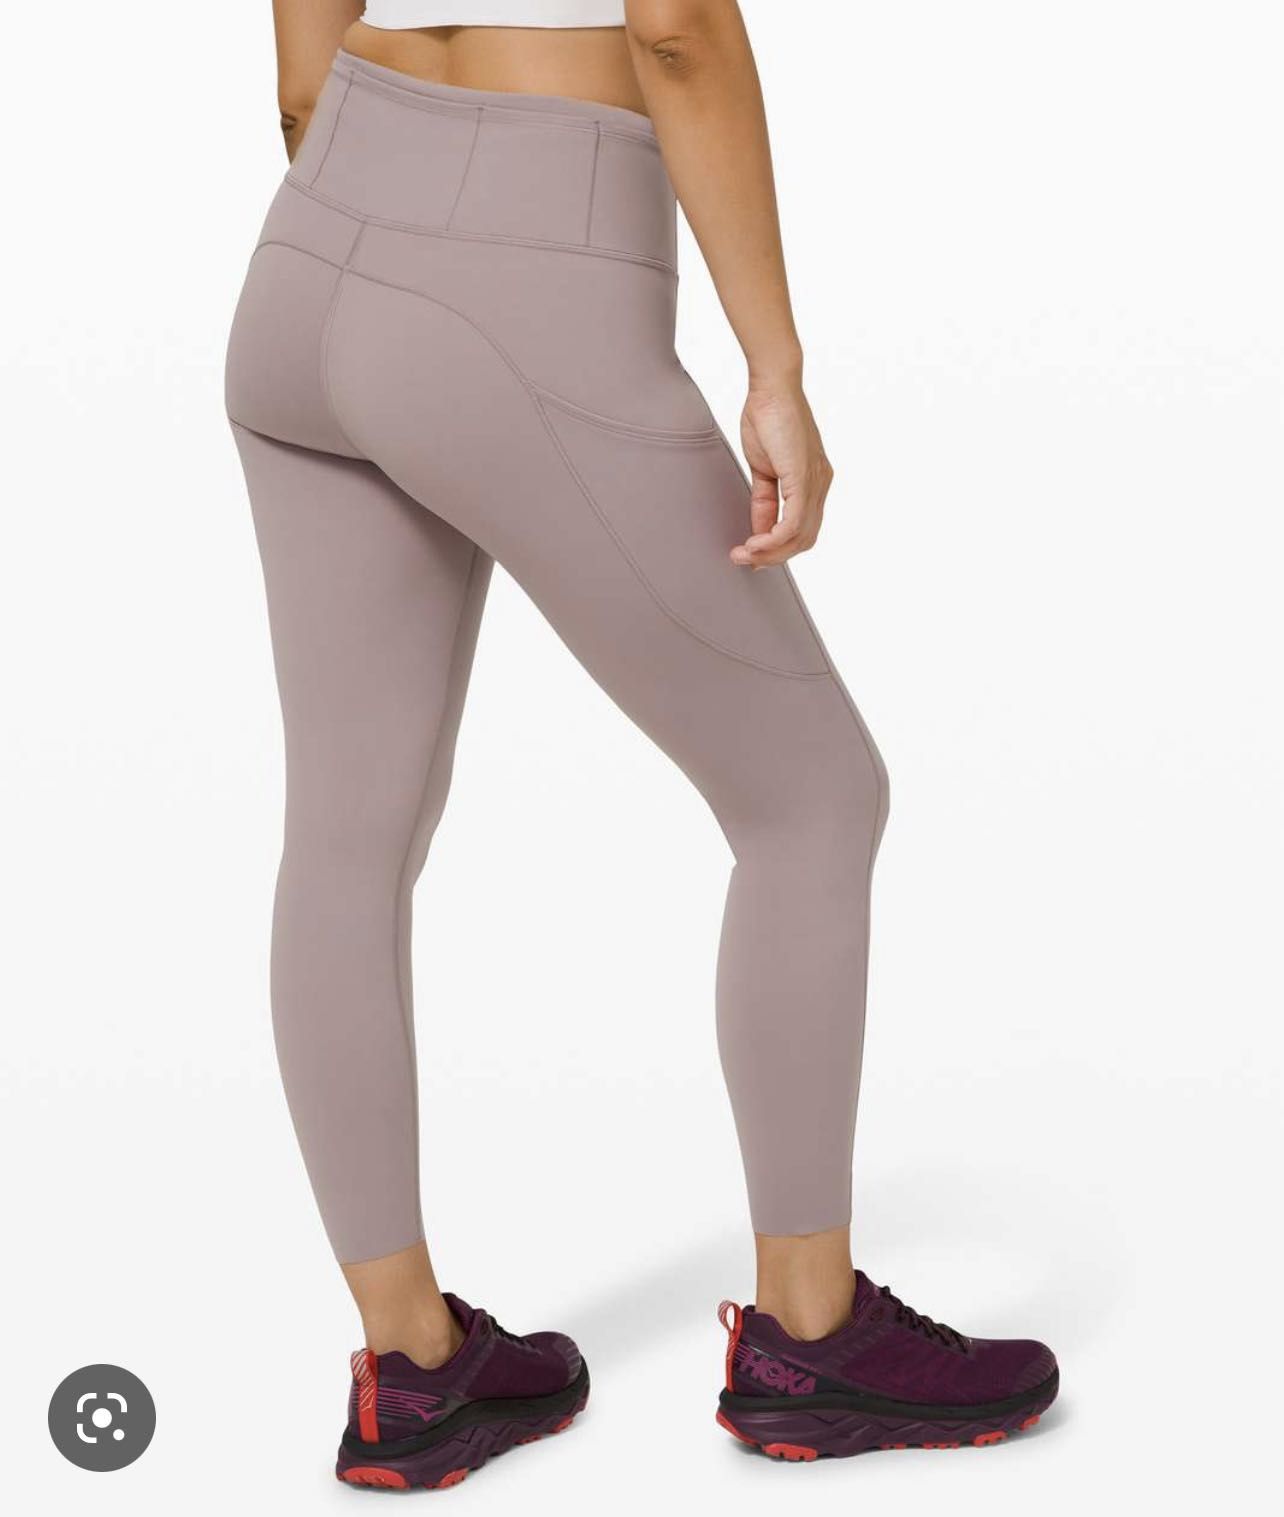 Lululemon Fast and Free Tight II 25 *Non-Reflective Nulux Violet